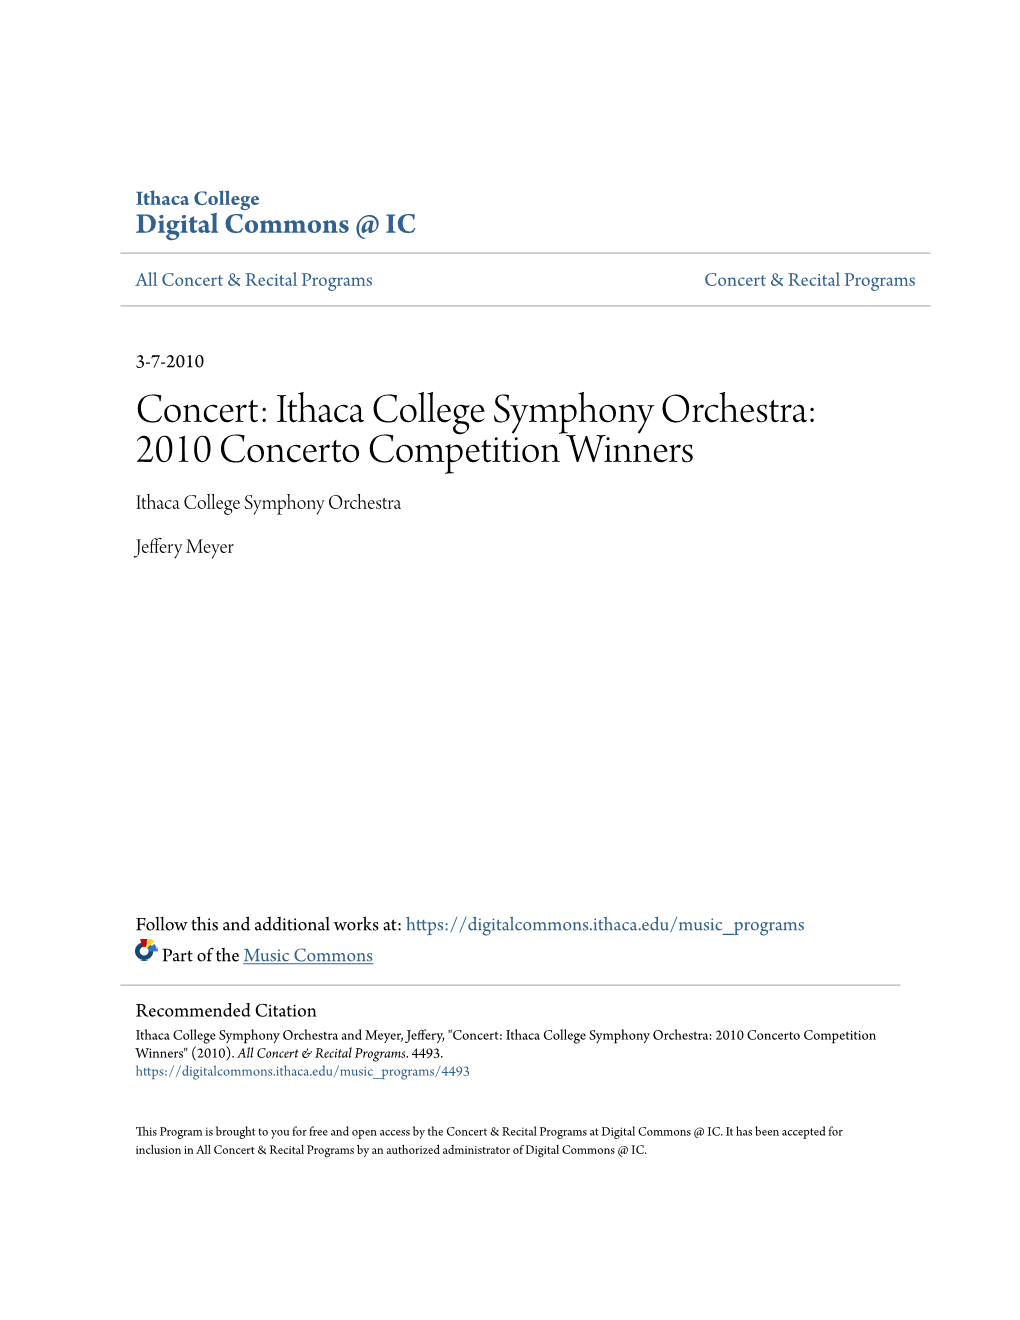 Concert: Ithaca College Symphony Orchestra: 2010 Concerto Competition Winners Ithaca College Symphony Orchestra